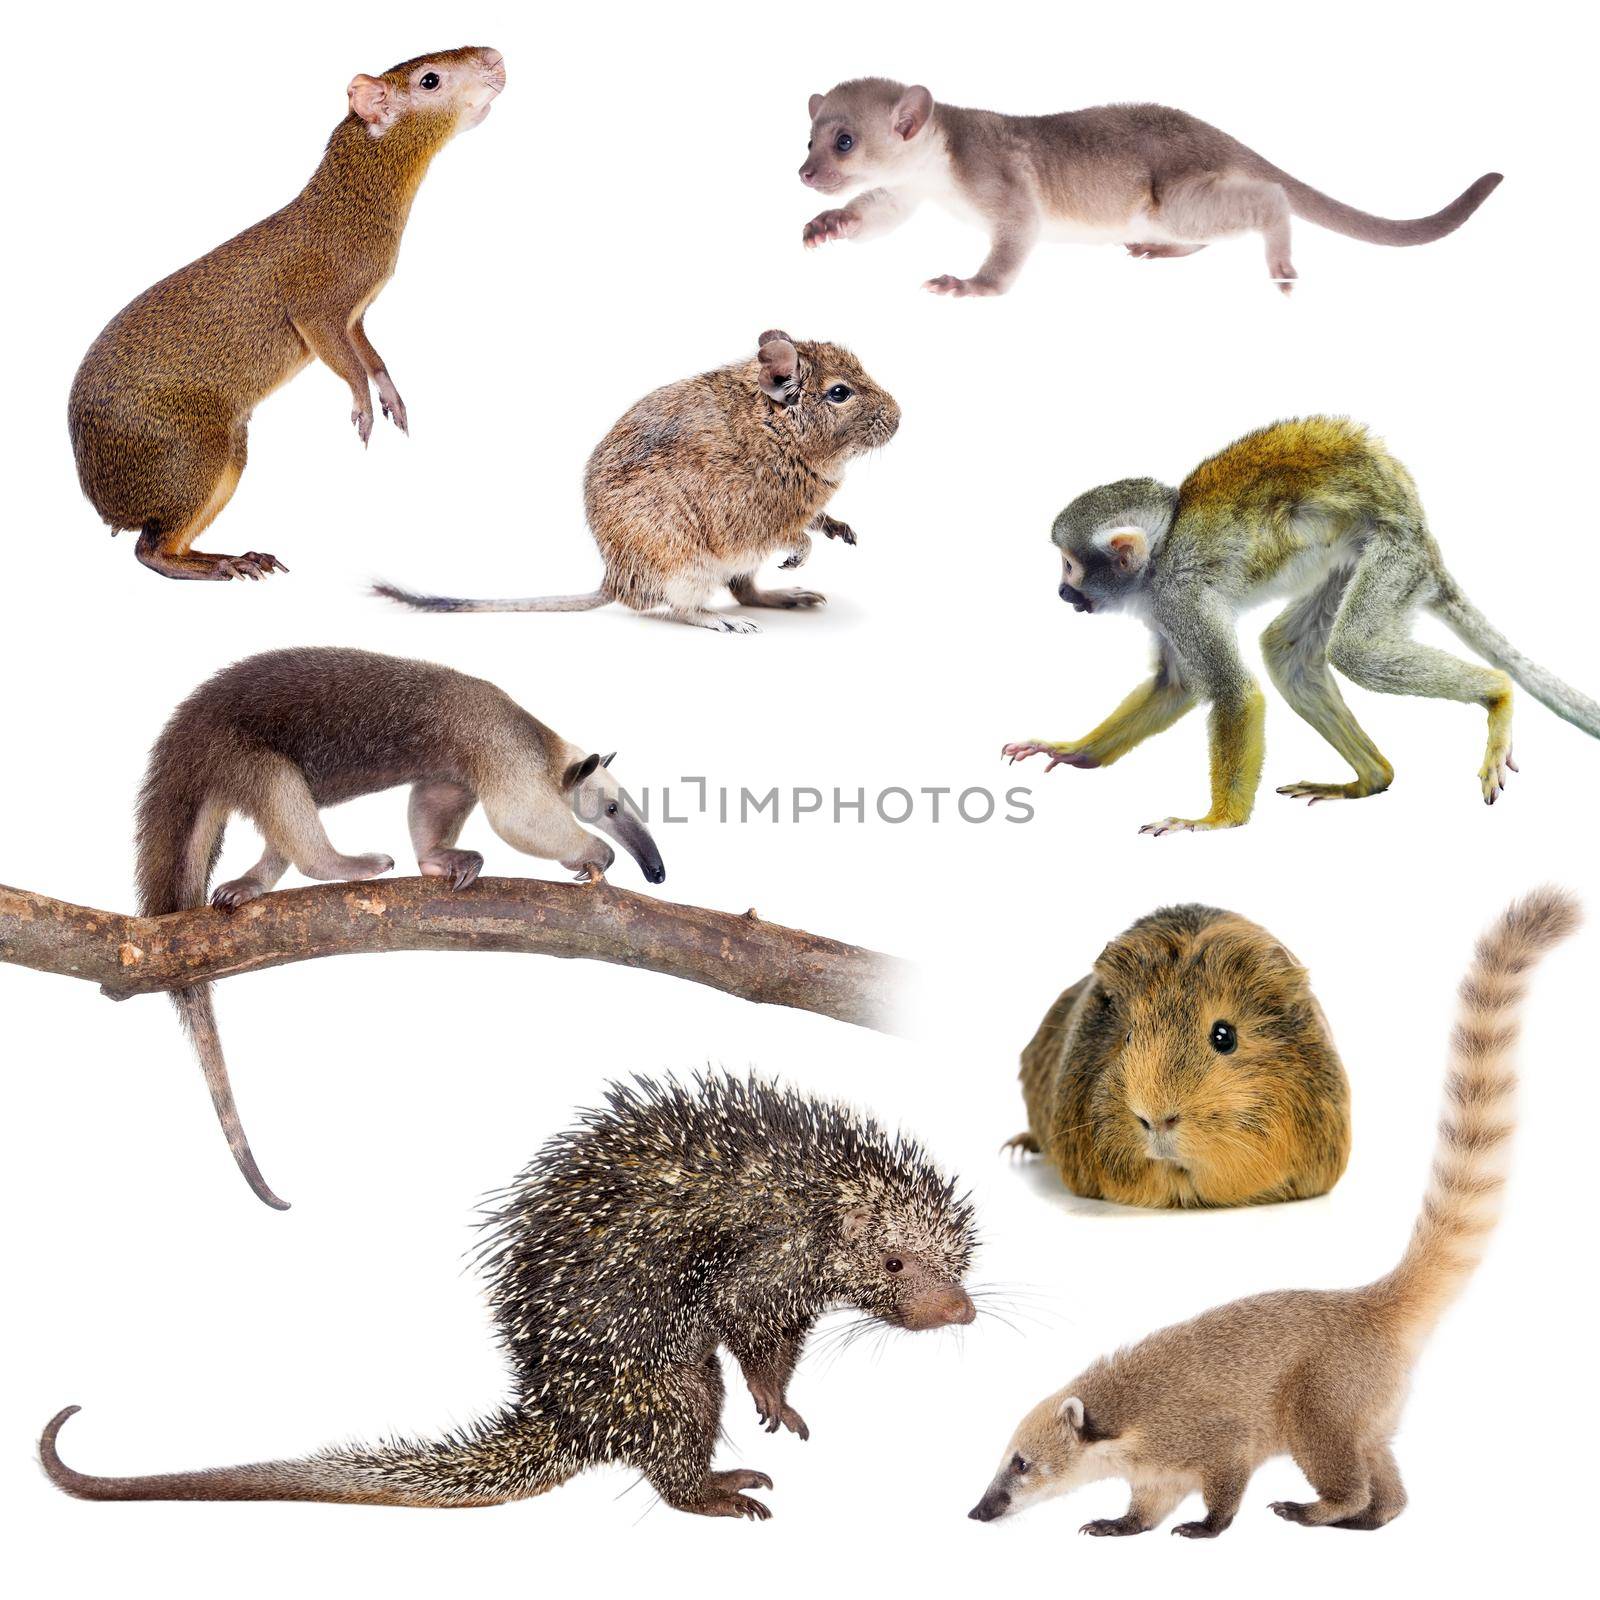 Mammals of South America on white by RosaJay